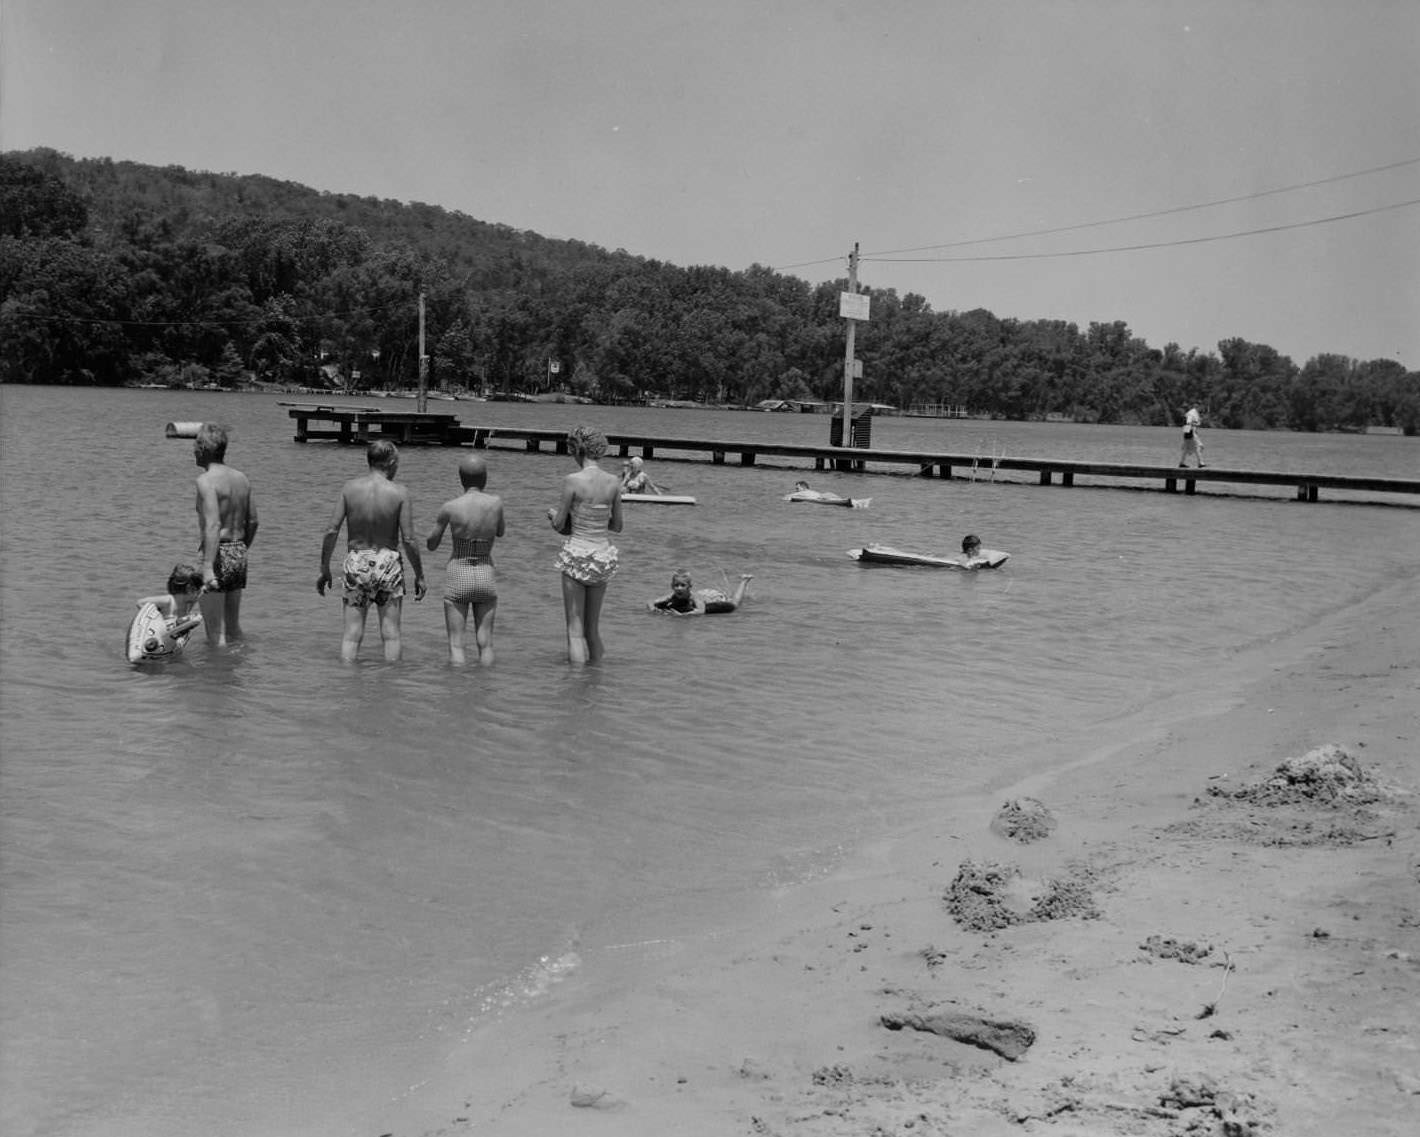 People wading and floating in the water at Lake Austin Beach, 1956